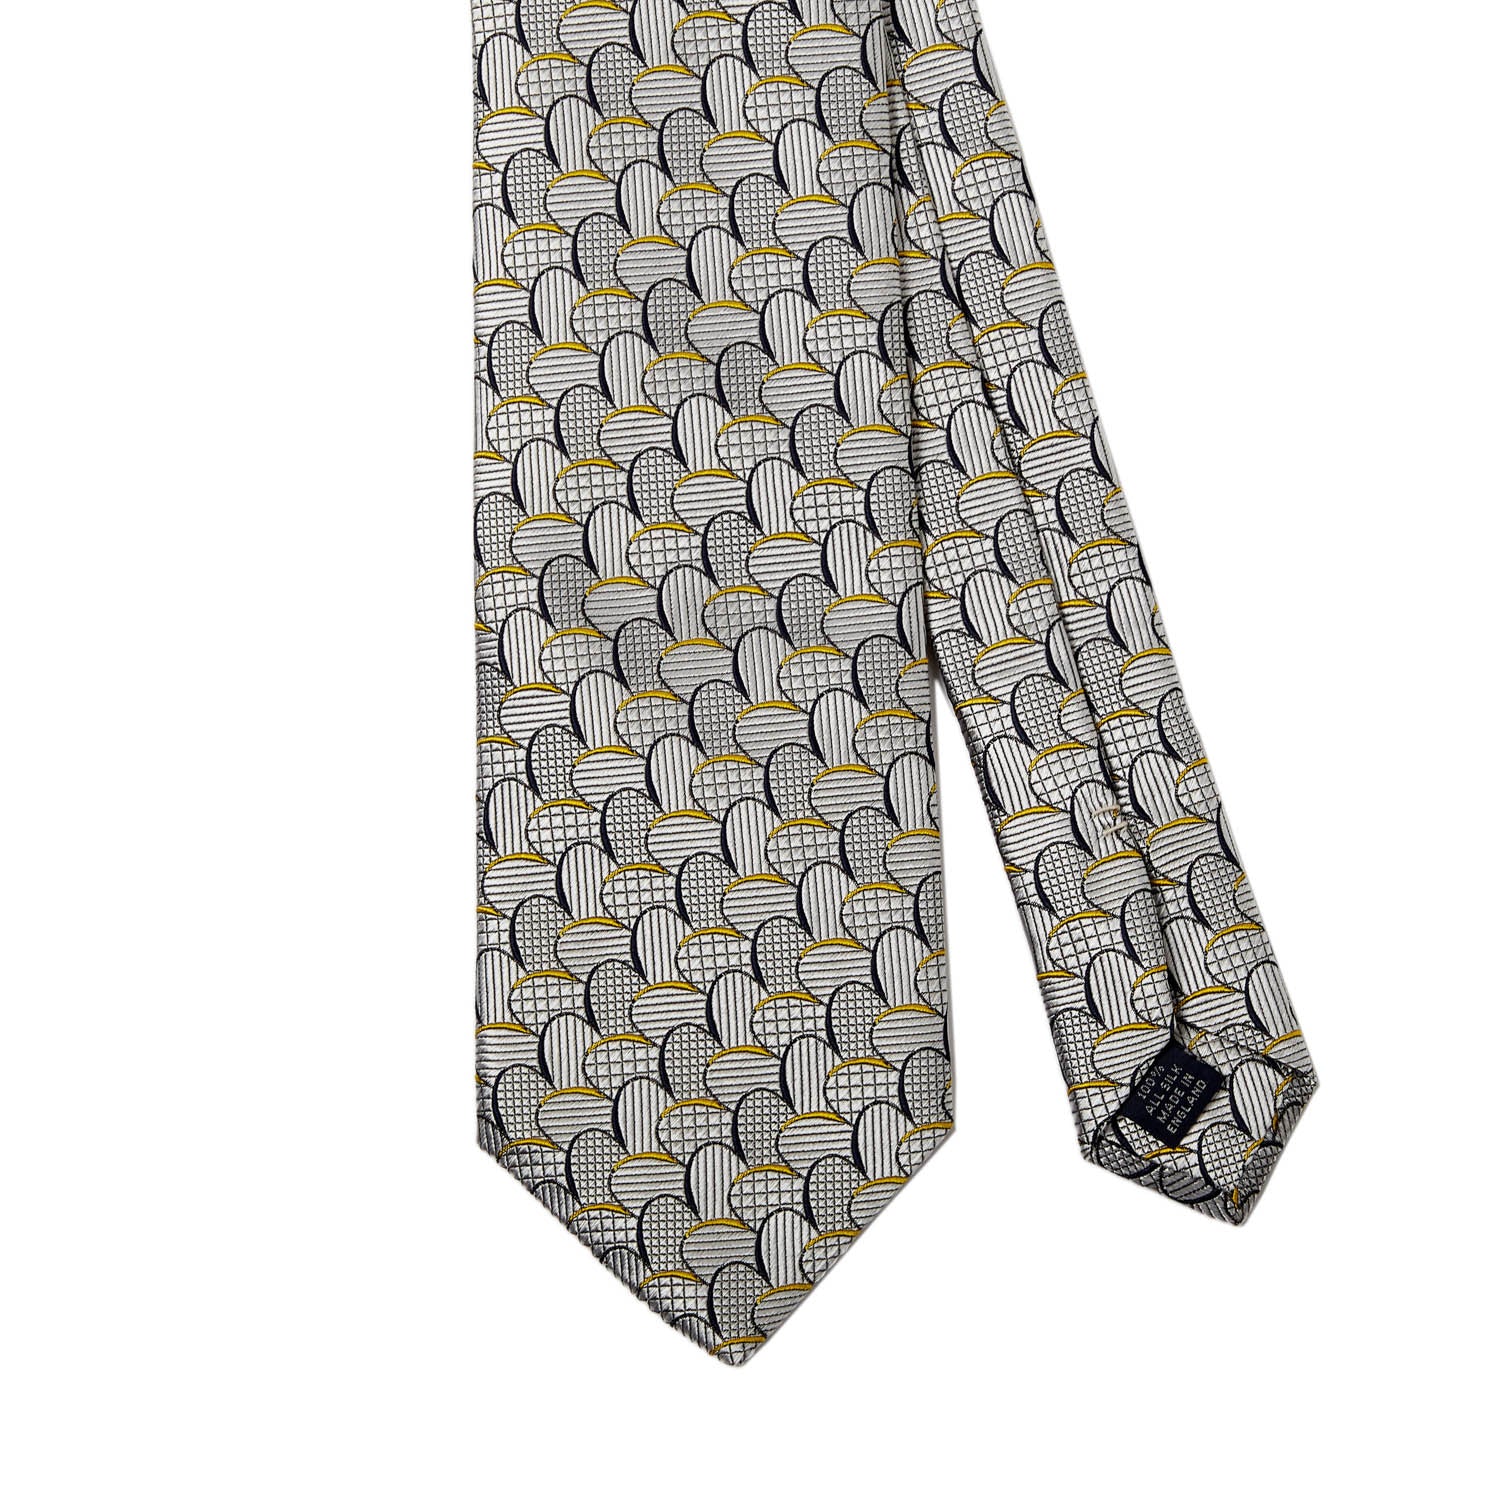 A handmade Sovereign Grade Sydney Jacquard Tie (150x8.5 cm) from KirbyAllison.com featuring a pattern, in grey and yellow.